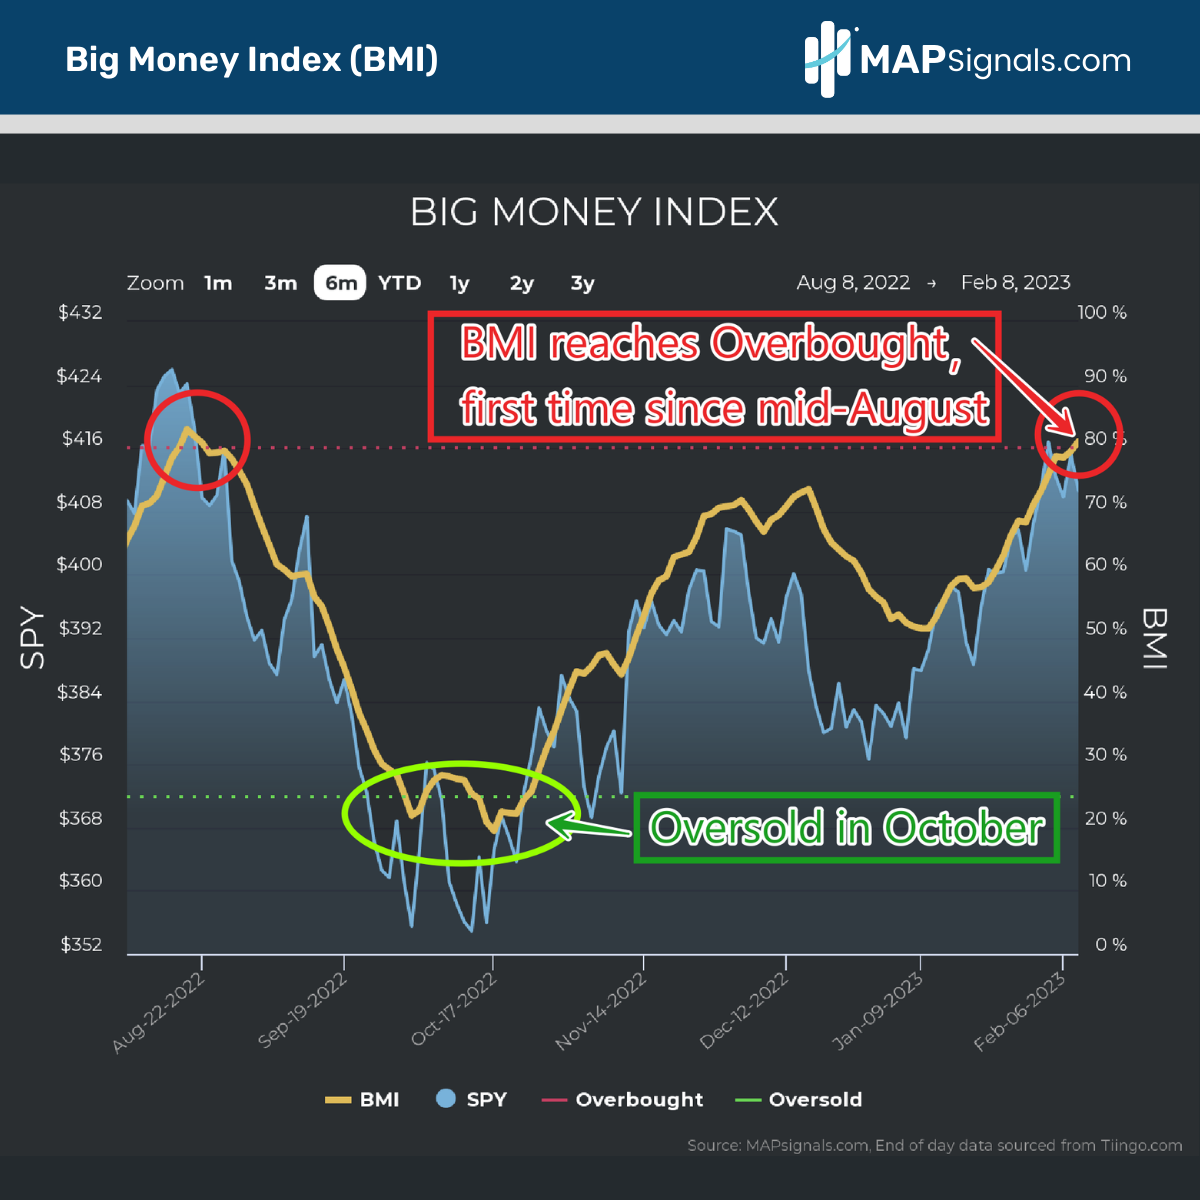 Big Money Index (BMI) reaches Overbought | MAPsignals